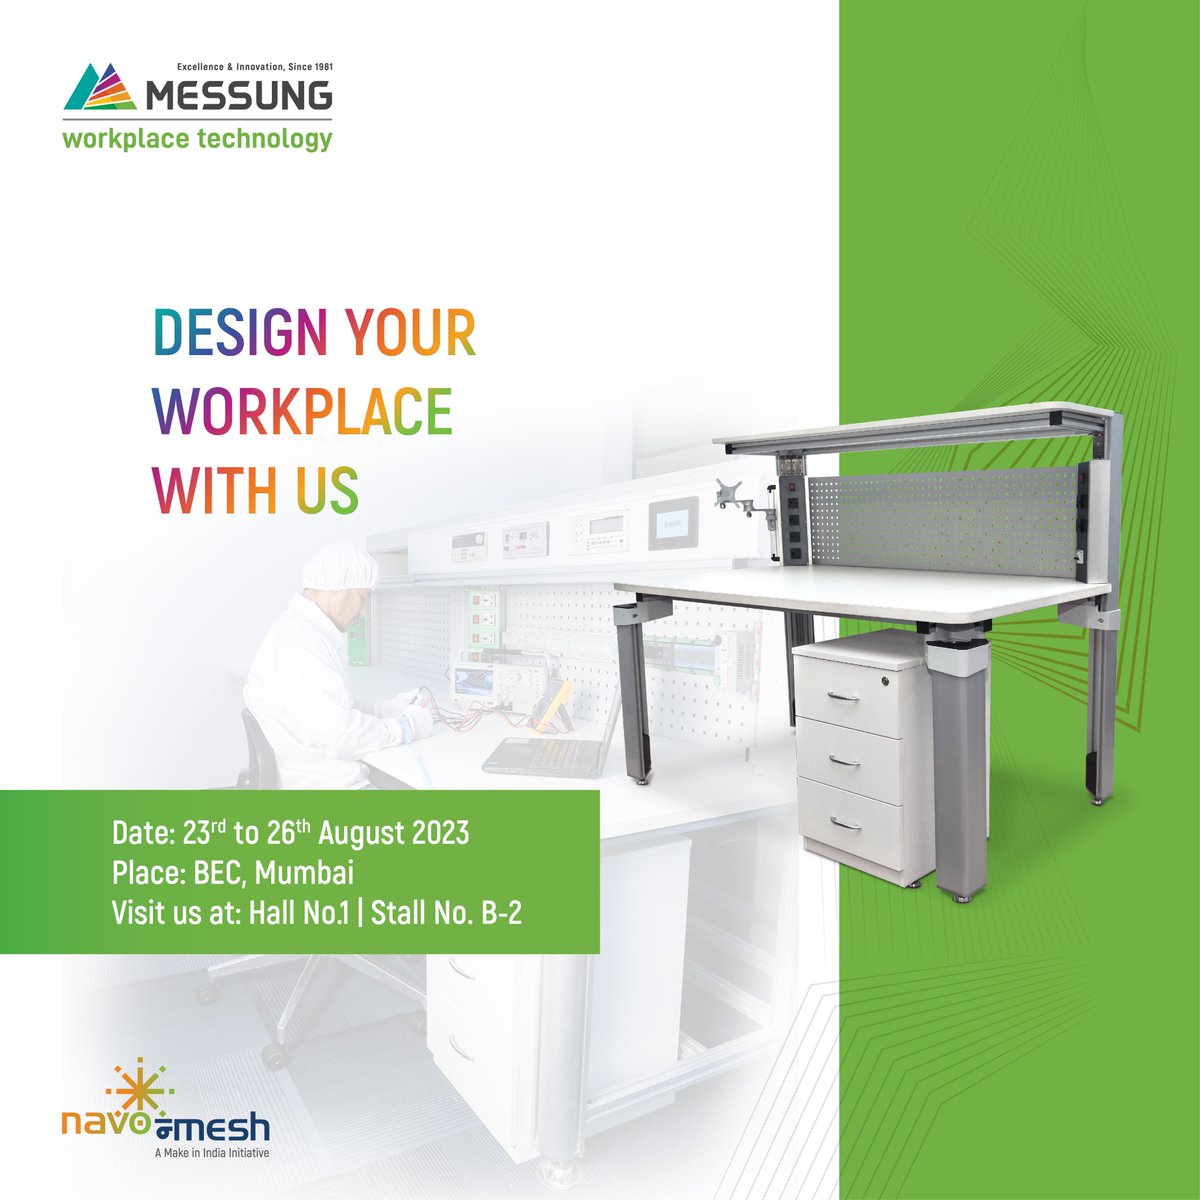 Upgrade your workplace with dynamic ESD-safe solutions by Messung.  Visit us at the Automation Expo,  commencing on August 23rd,  at stall no. B-2.  #Mumbai #automationexpo #expo2023 #Technology #Exhibition2023 #esdworktable #esdtable #AFMworktable #volumetricesd #puchairs